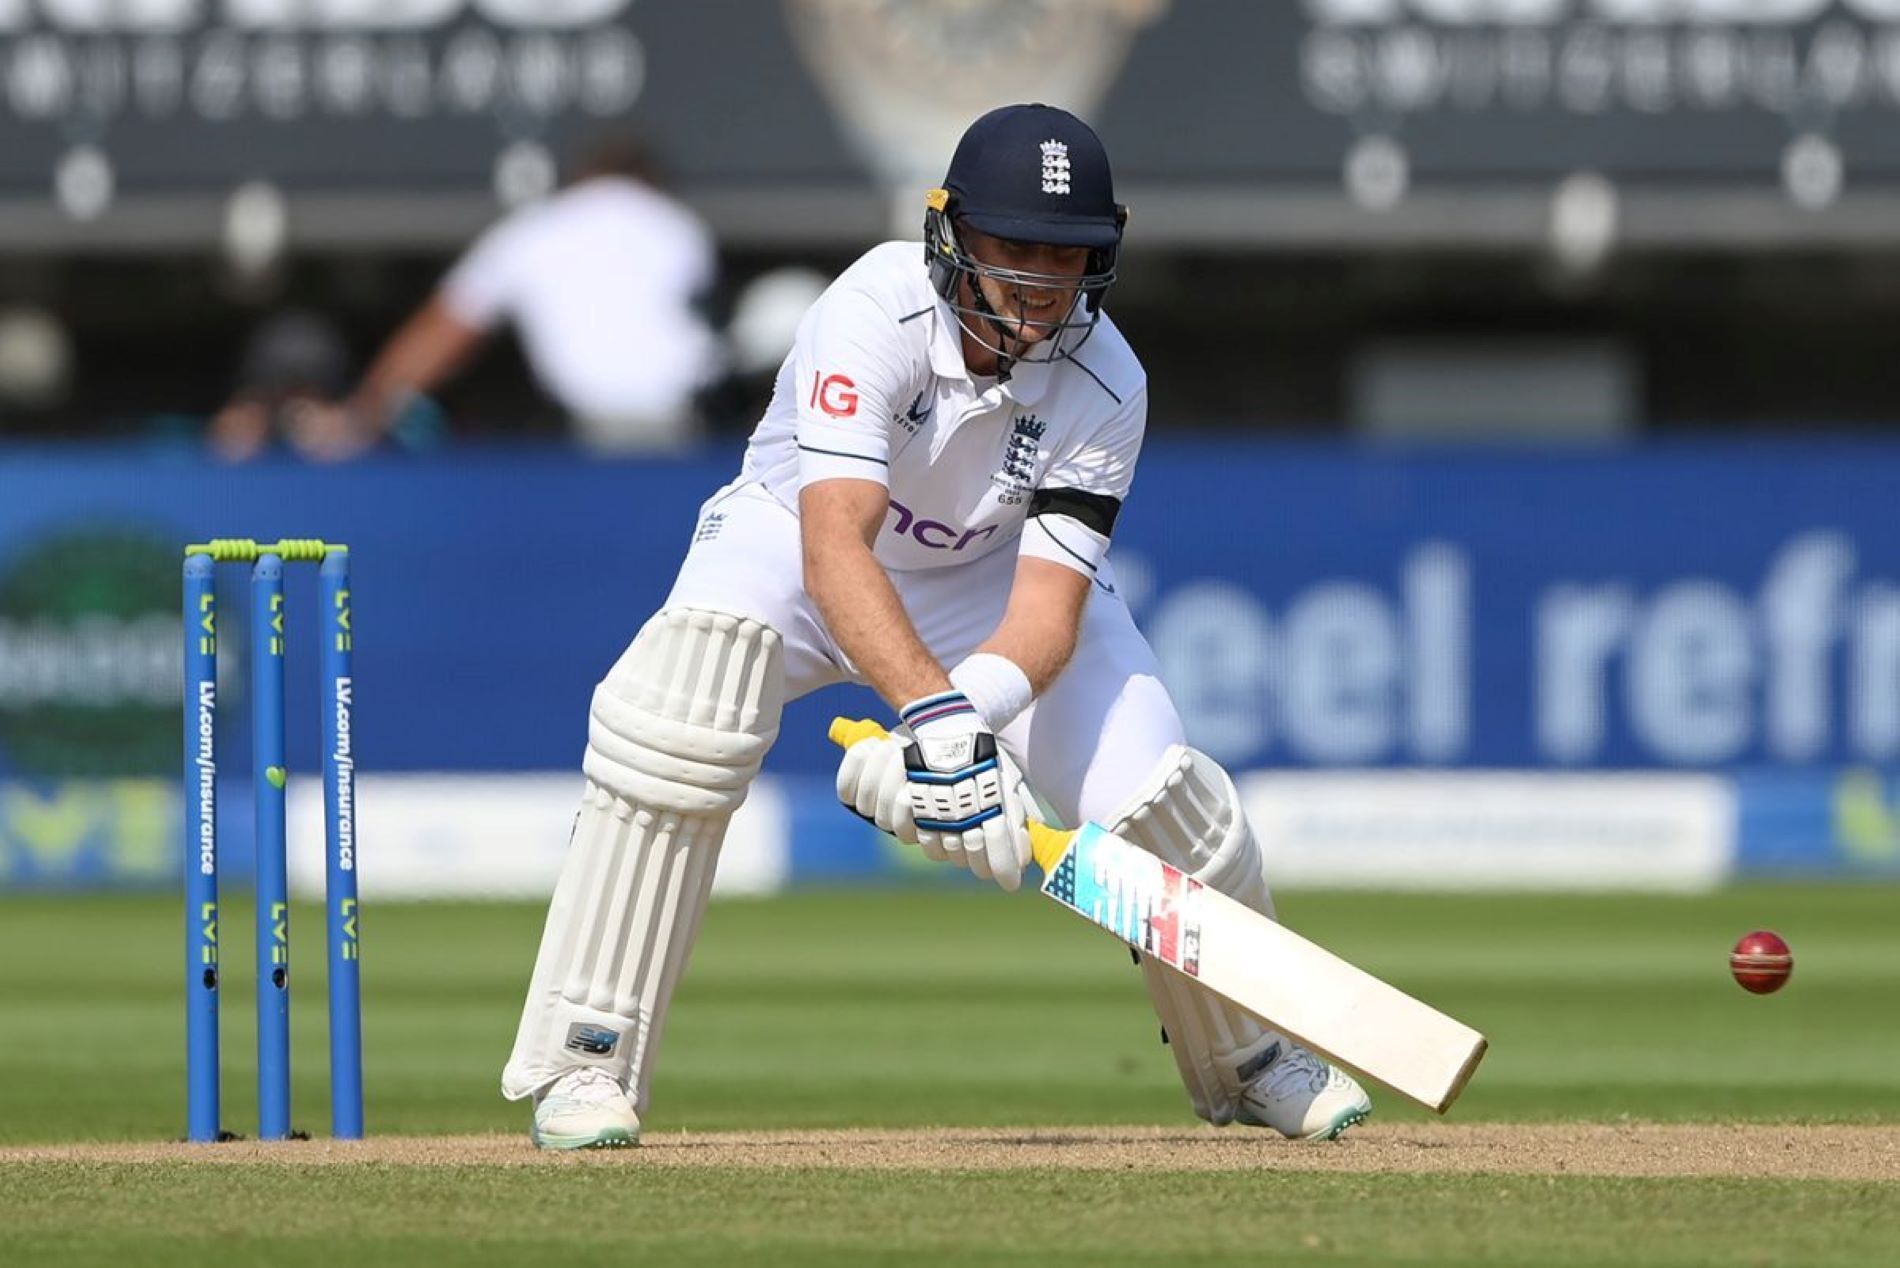 Joe Root will hope to emulate his reverse ramps in India next year.